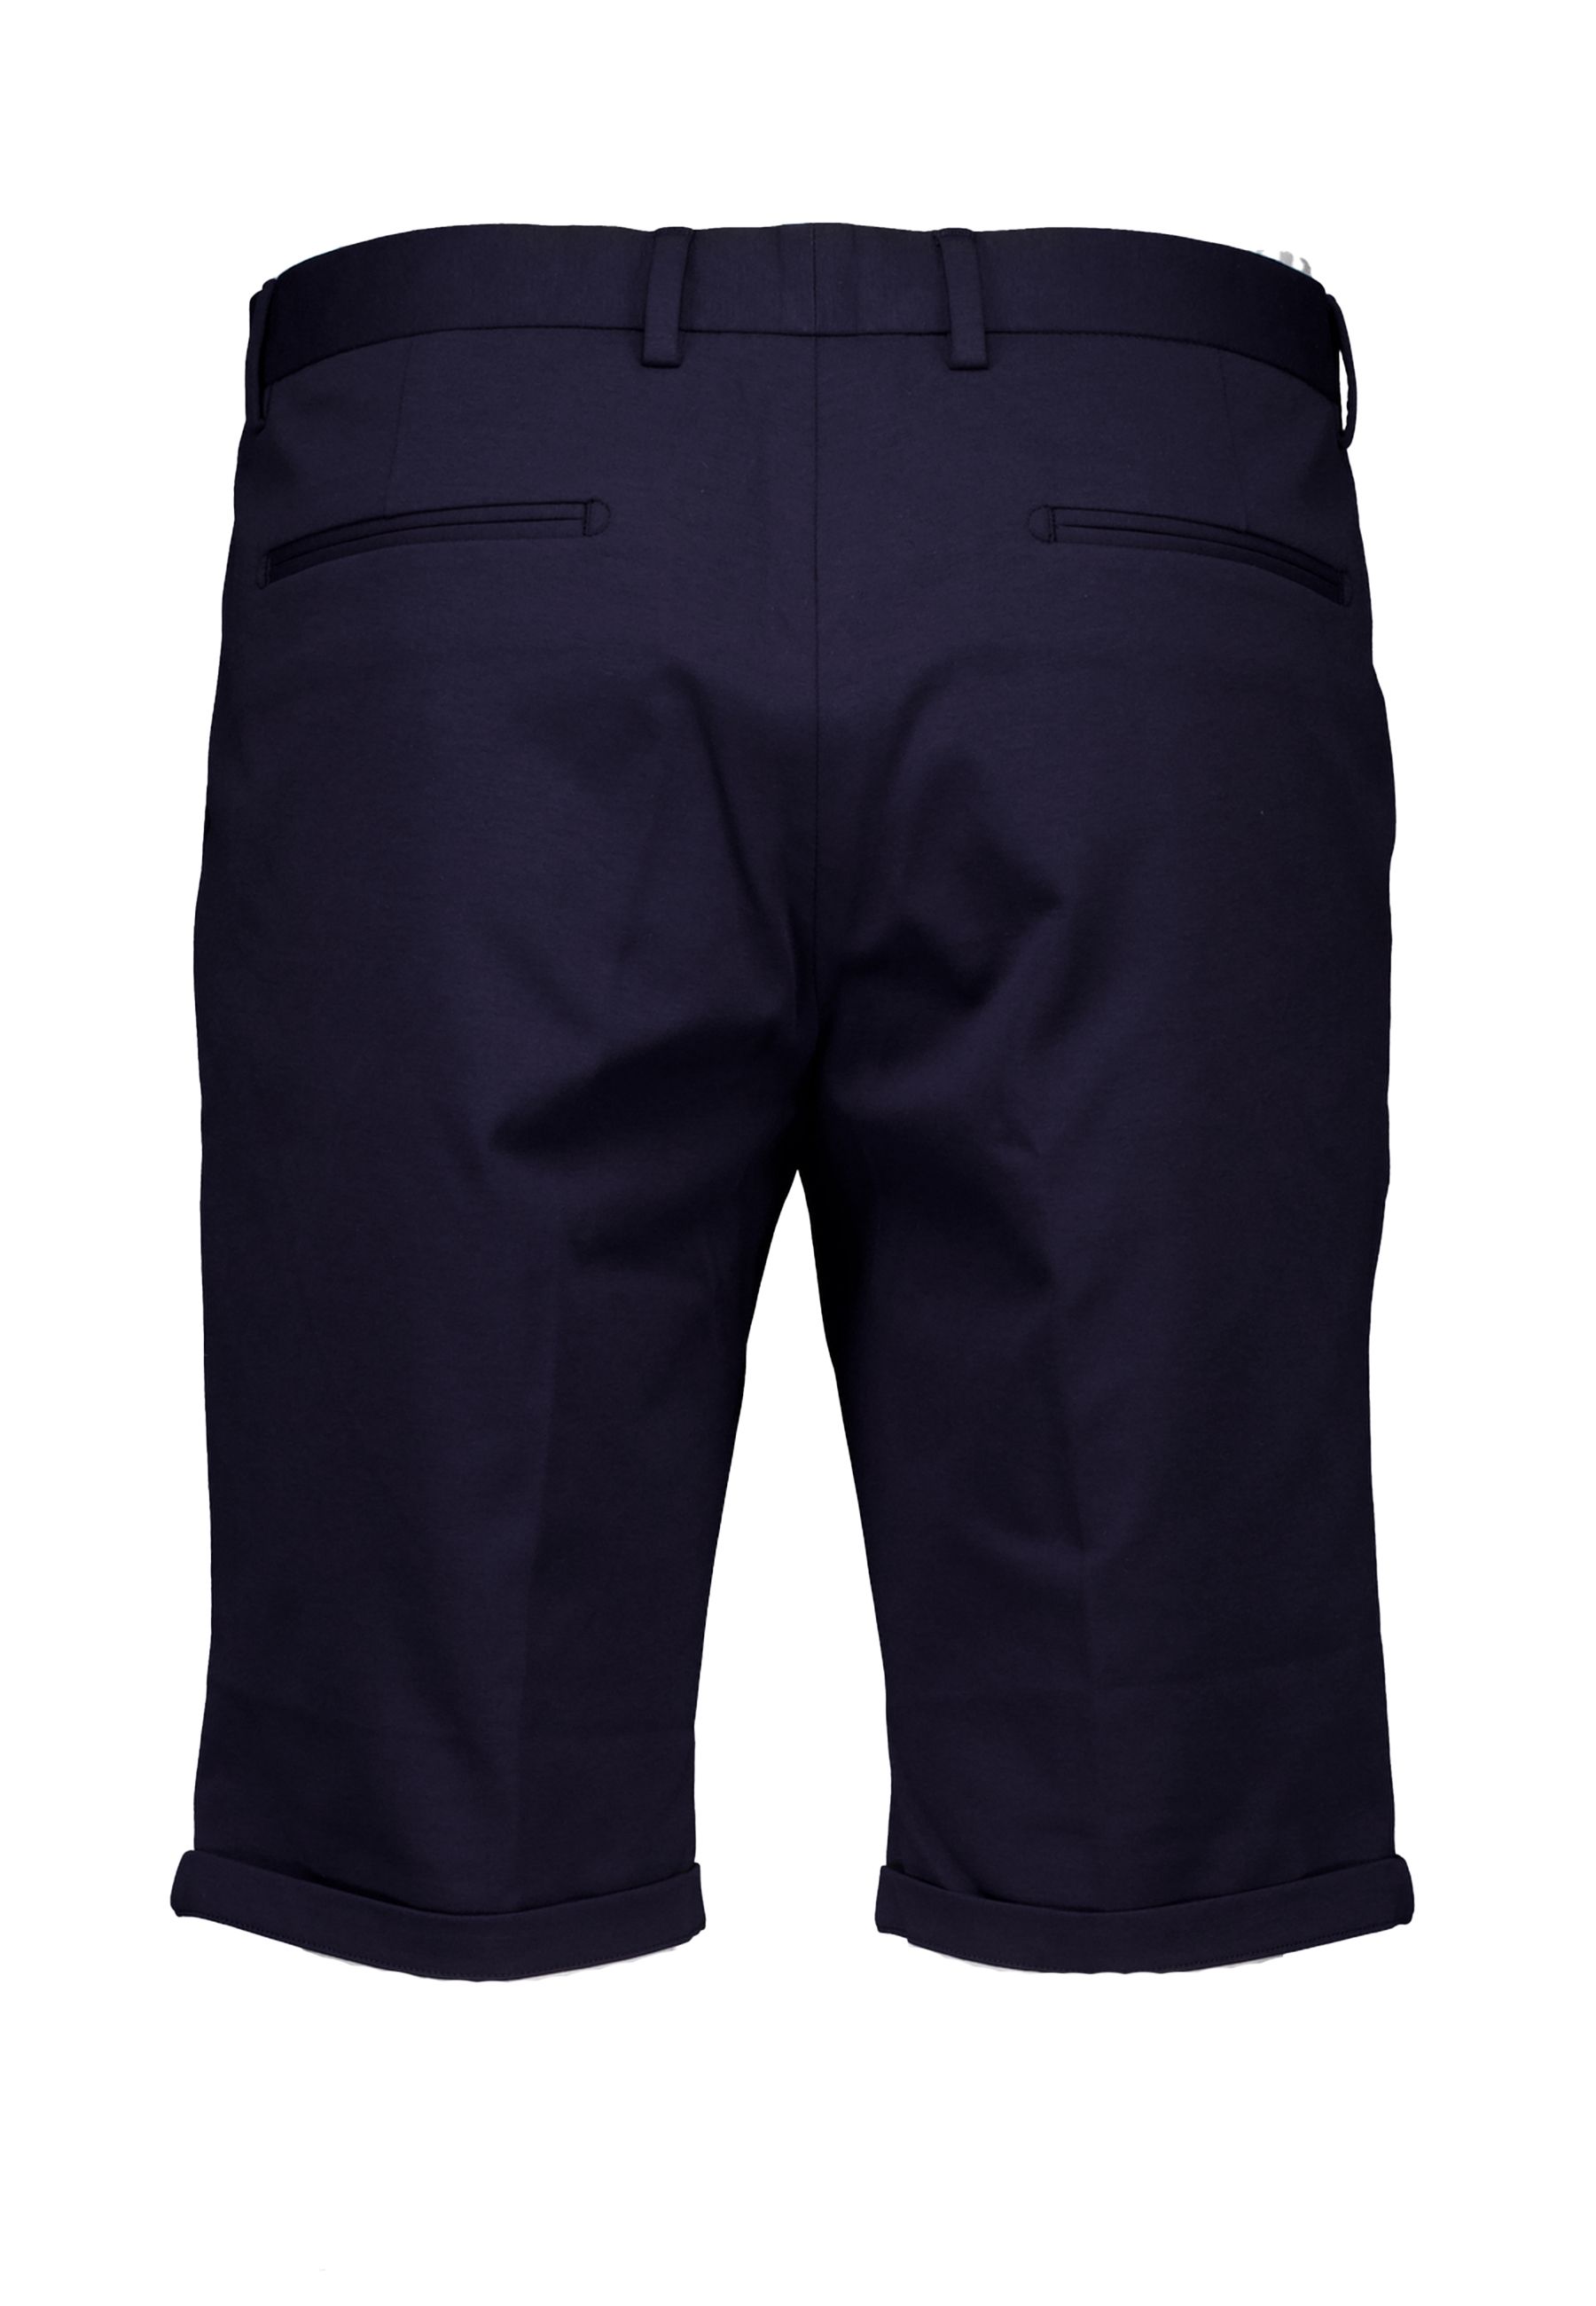 Philly shorts donkerblauw